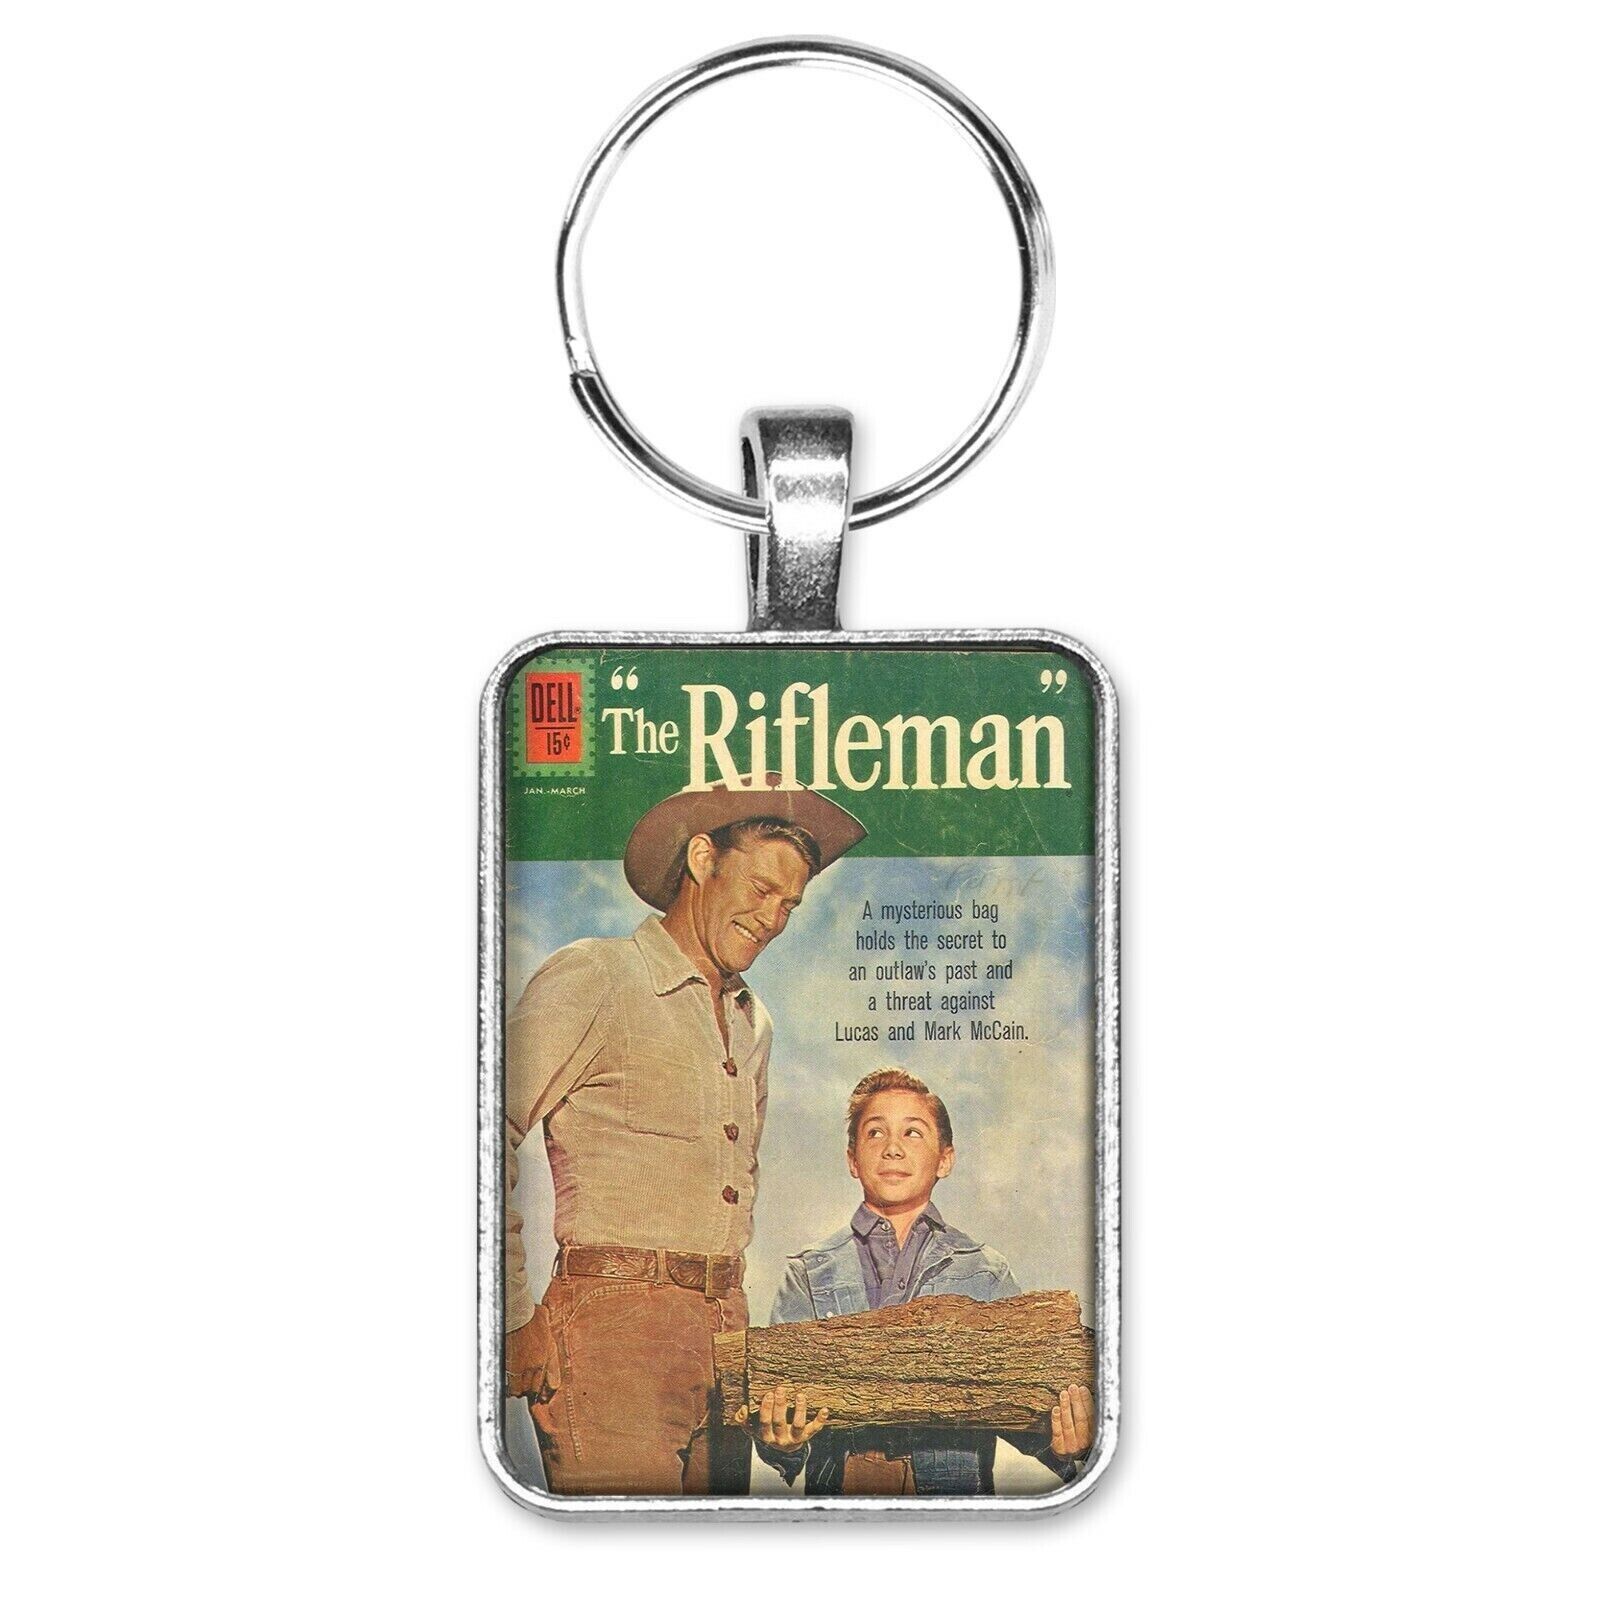 The Rifleman #10 Suggestive Funny Cover Key Ring or Necklace Western Show Comic